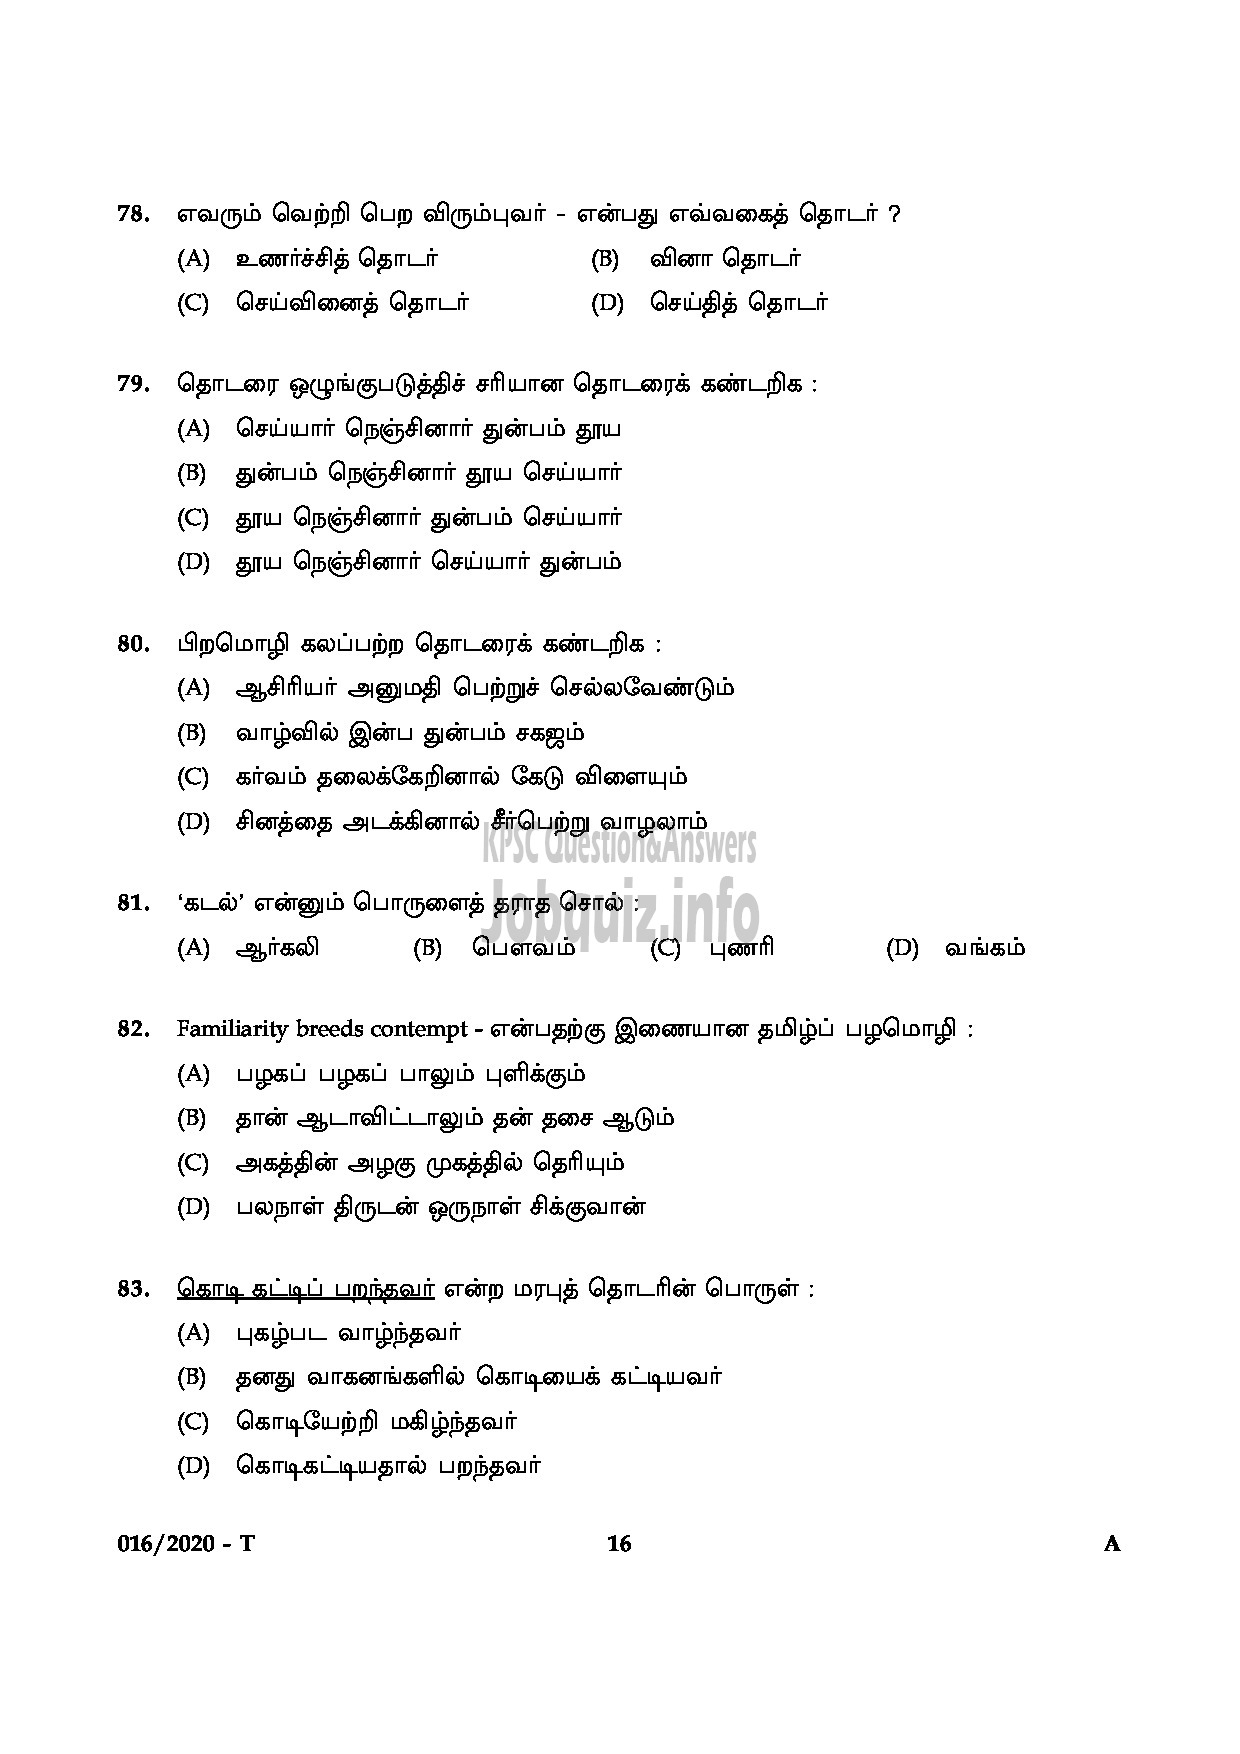 Kerala PSC Question Paper - KAS OFFICER (JUNIOR TIME SCALE) TRAINEE KERALA ADMINISTRATIVE SERVICE ENGLISH / TAMIL-16